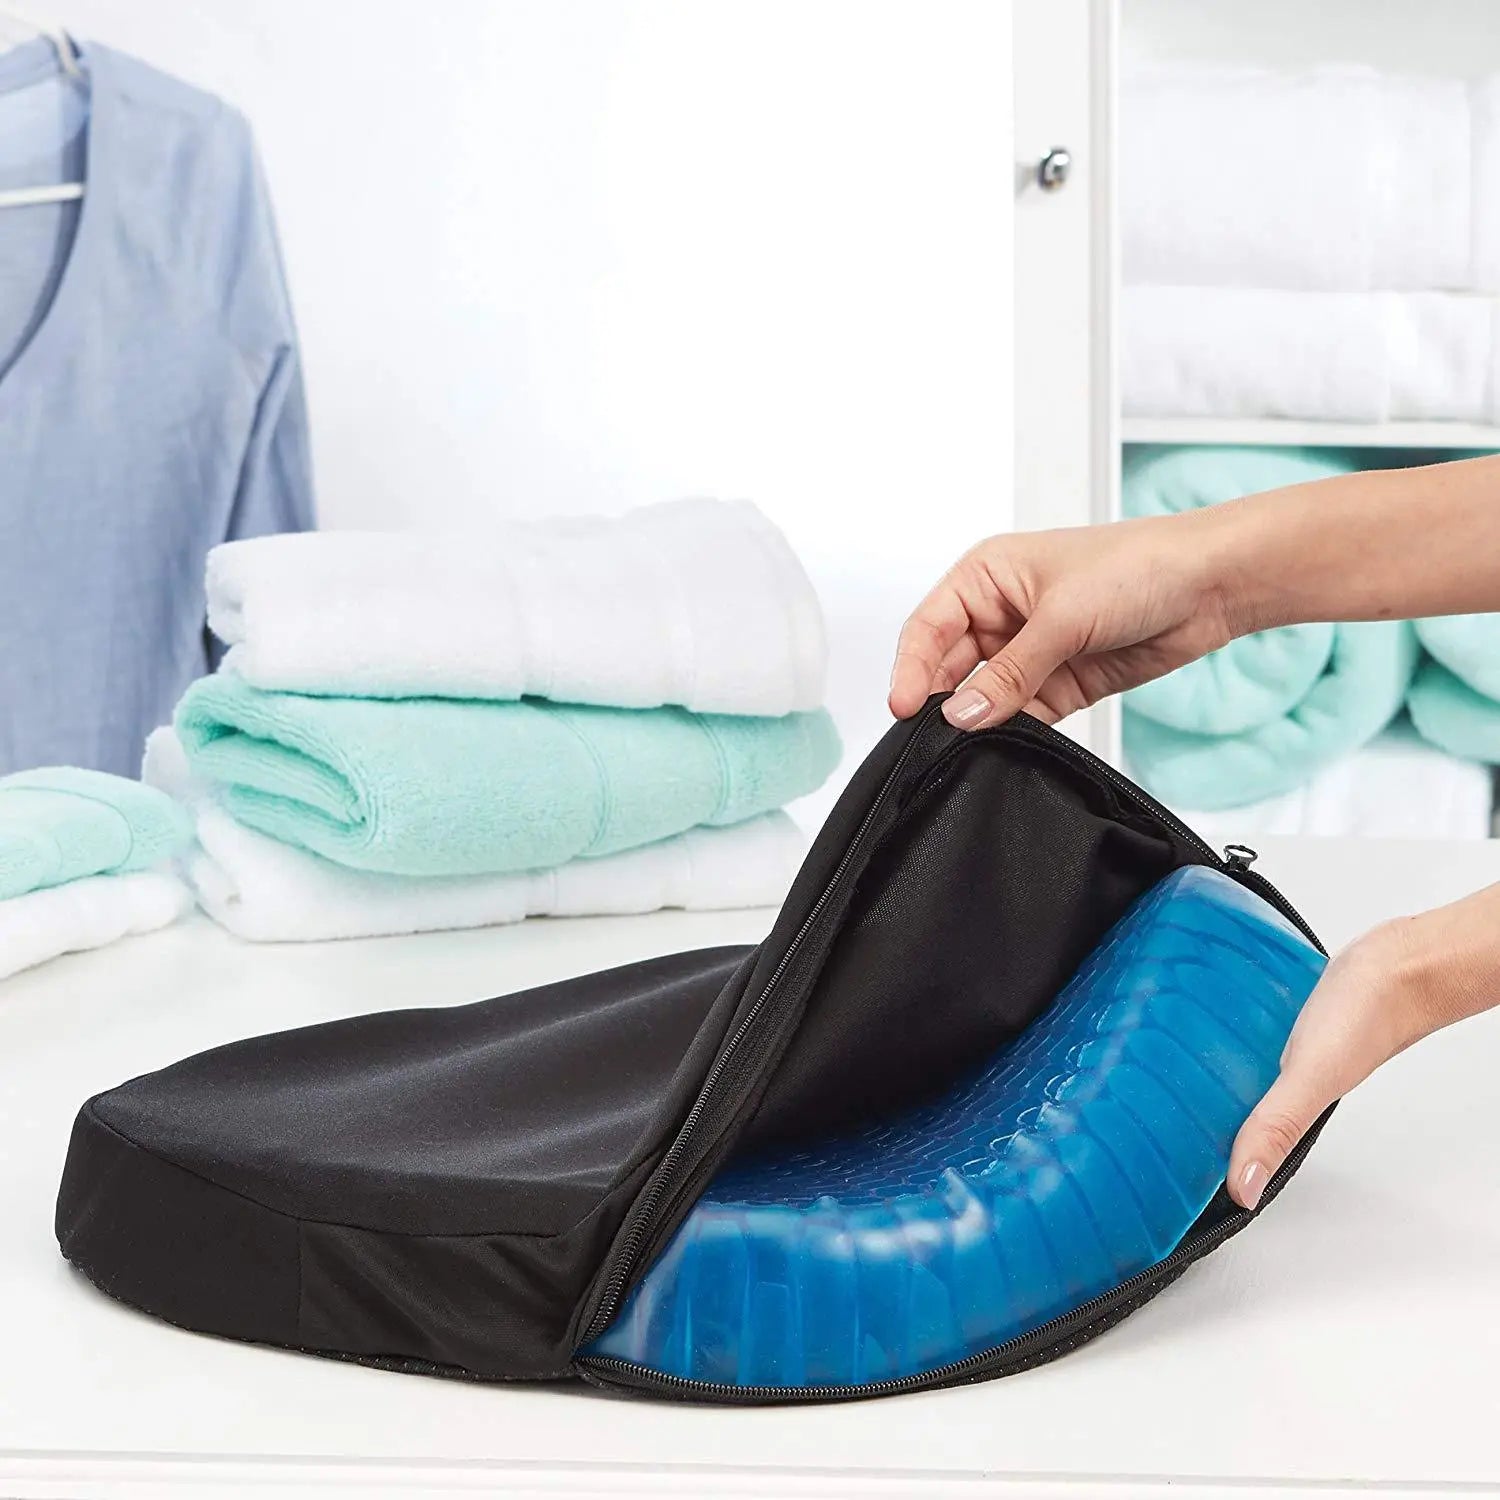 A person unzipping a black carrying case to reveal a blue Home Essentials-5 Elastic Silicone Gel Cushion inside, placed on a white countertop with folded towels in the background.